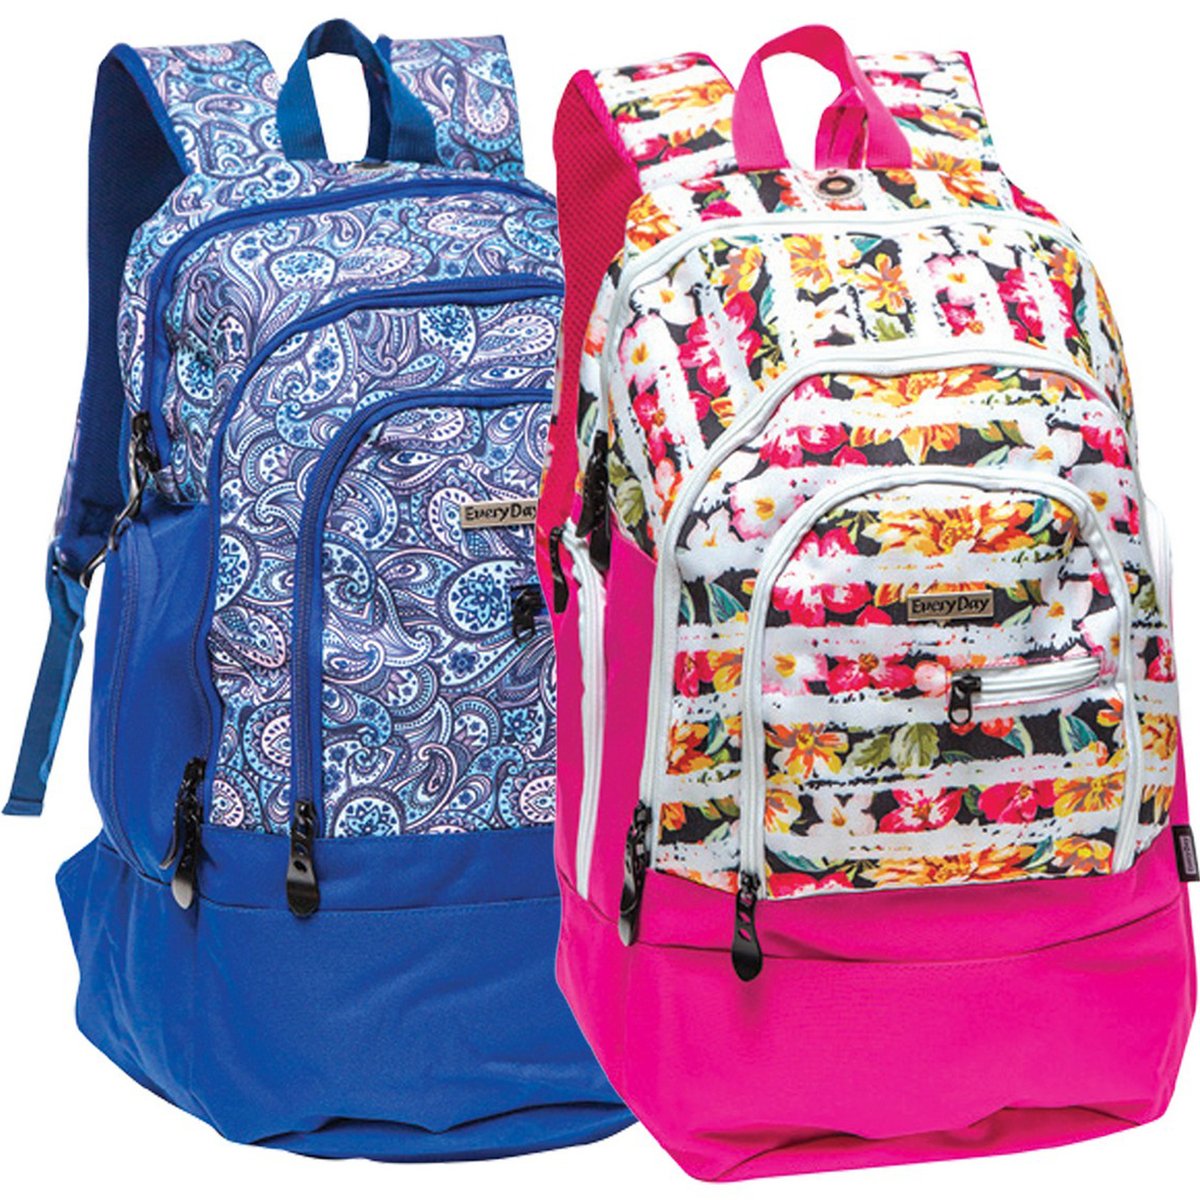 Everyday Backpack ED160115 20in Assorted Per pc